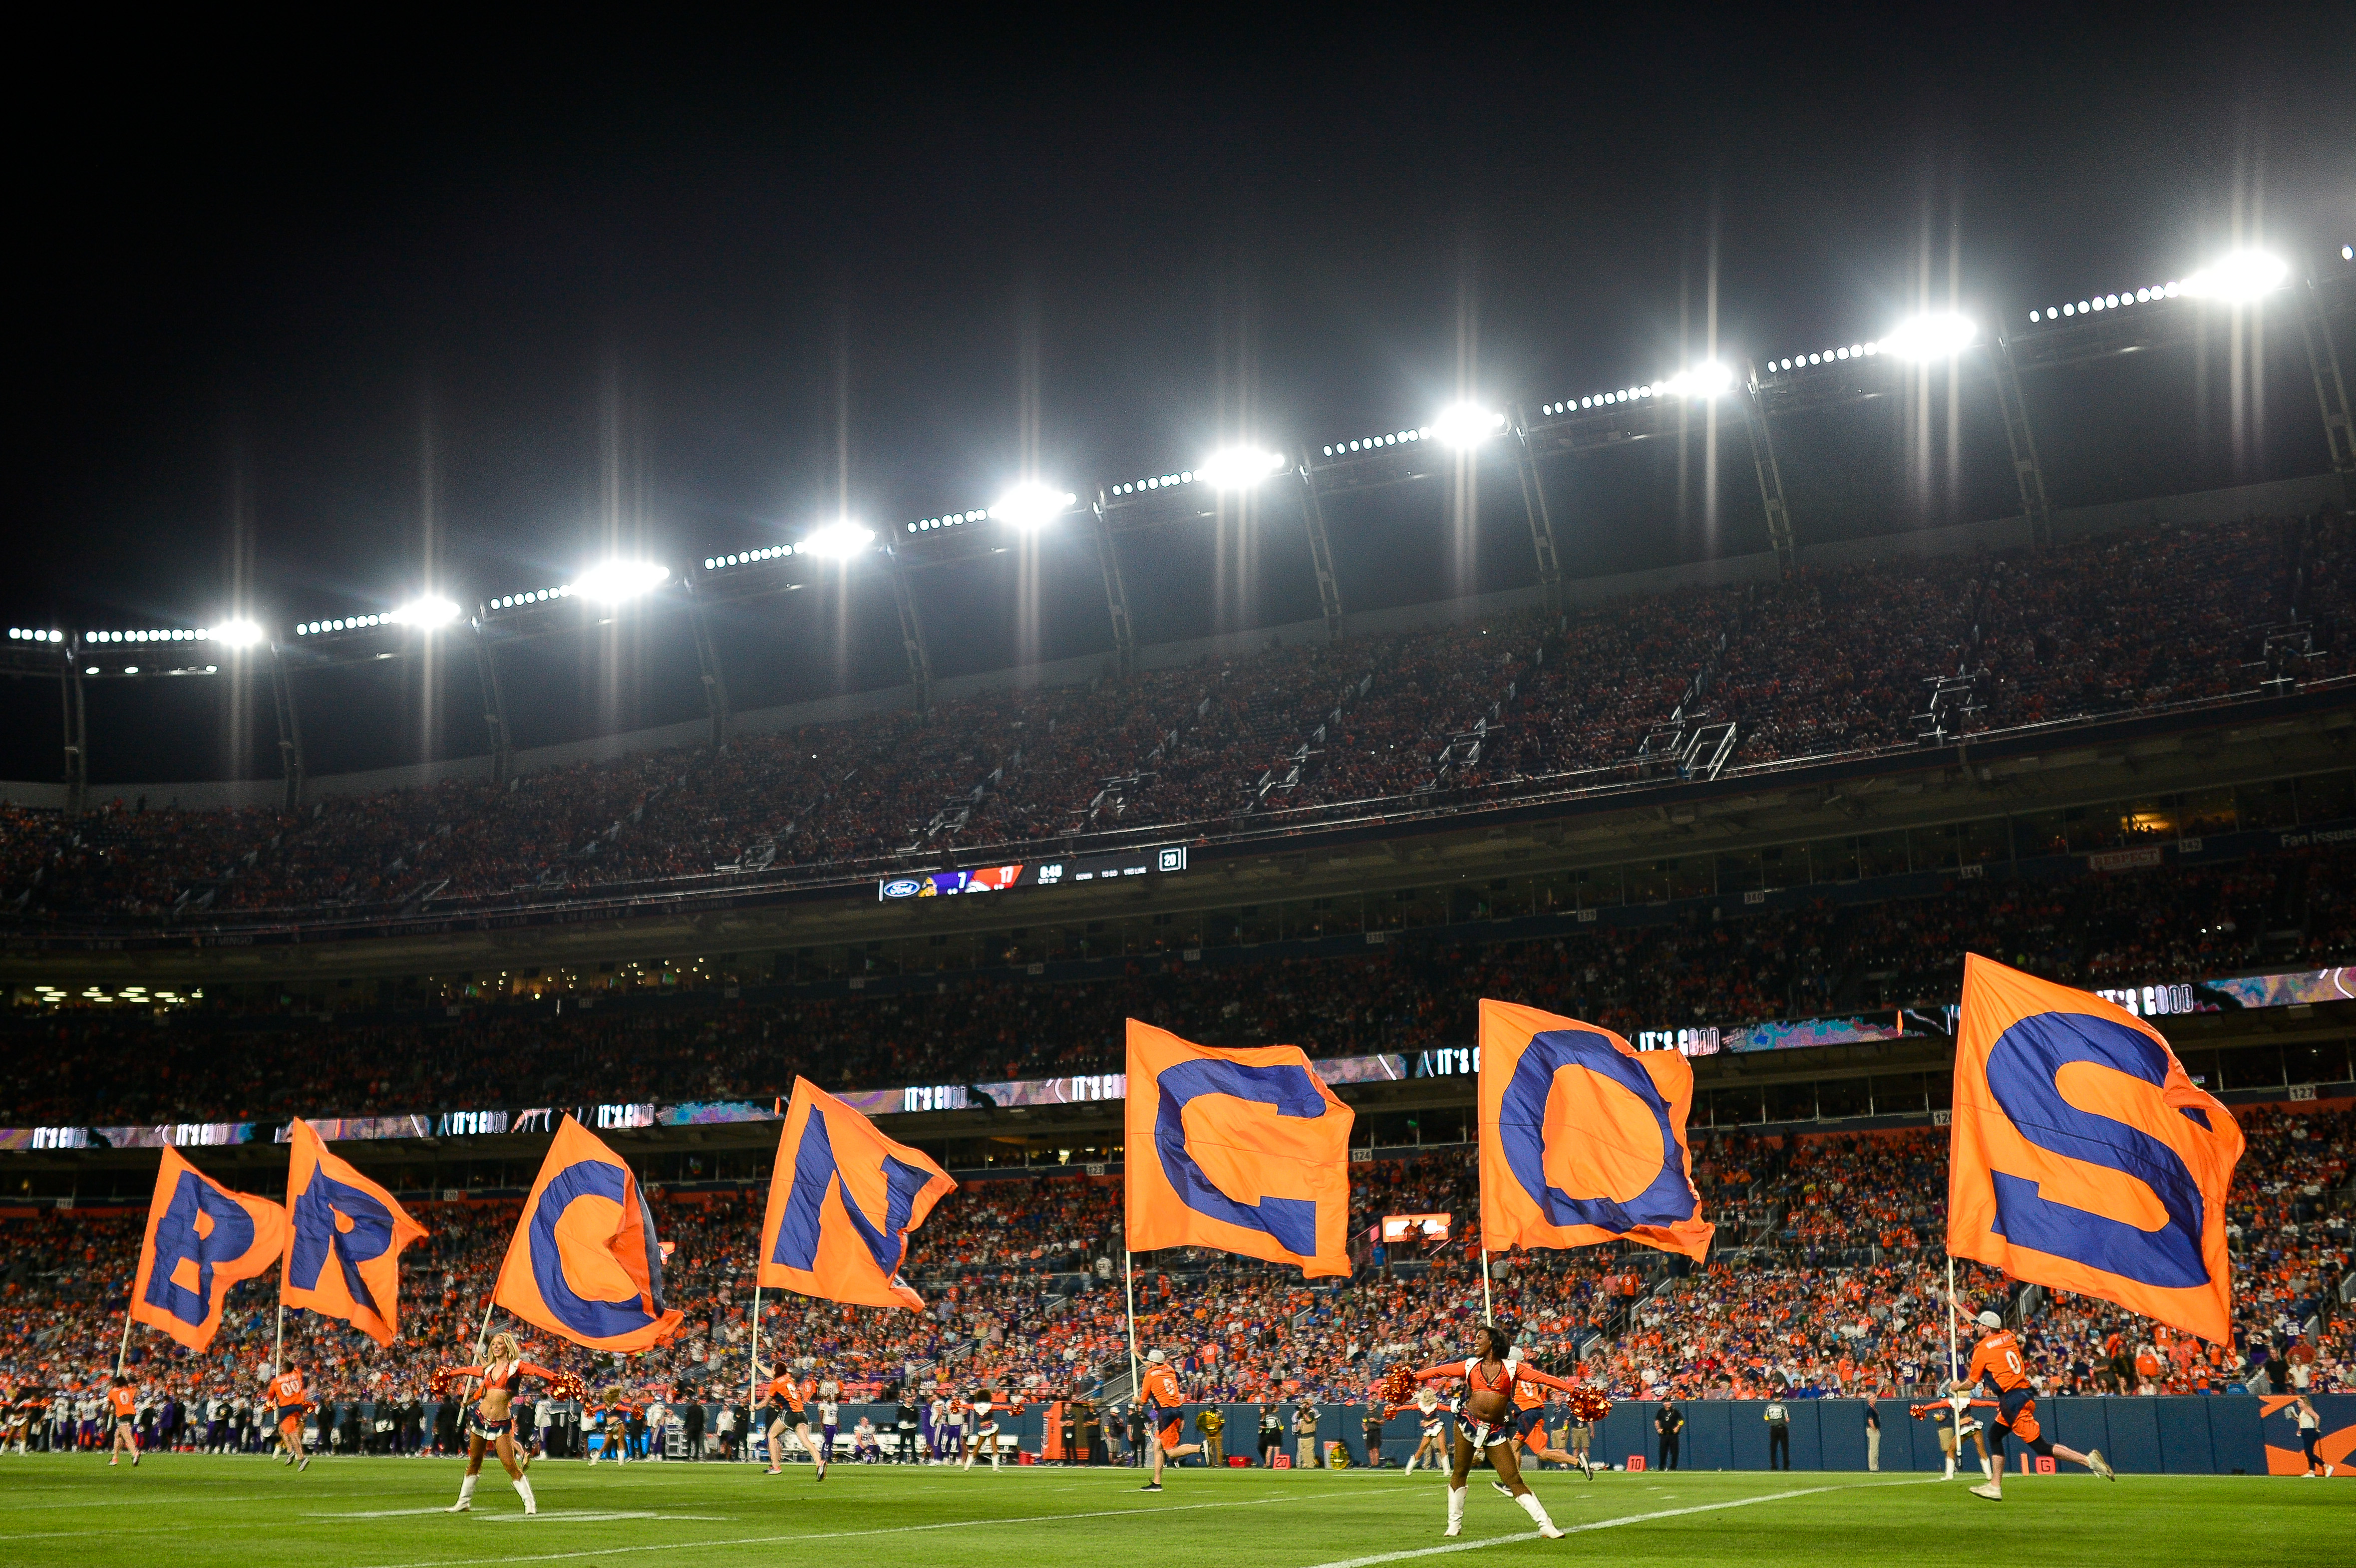 Cheerleaders perform in a general view after a Denver Broncos score in a preseason NFL game against the Minnesota Vikings at Empower Field at Mile High on August 27, 2022 in Denver, Colorado.